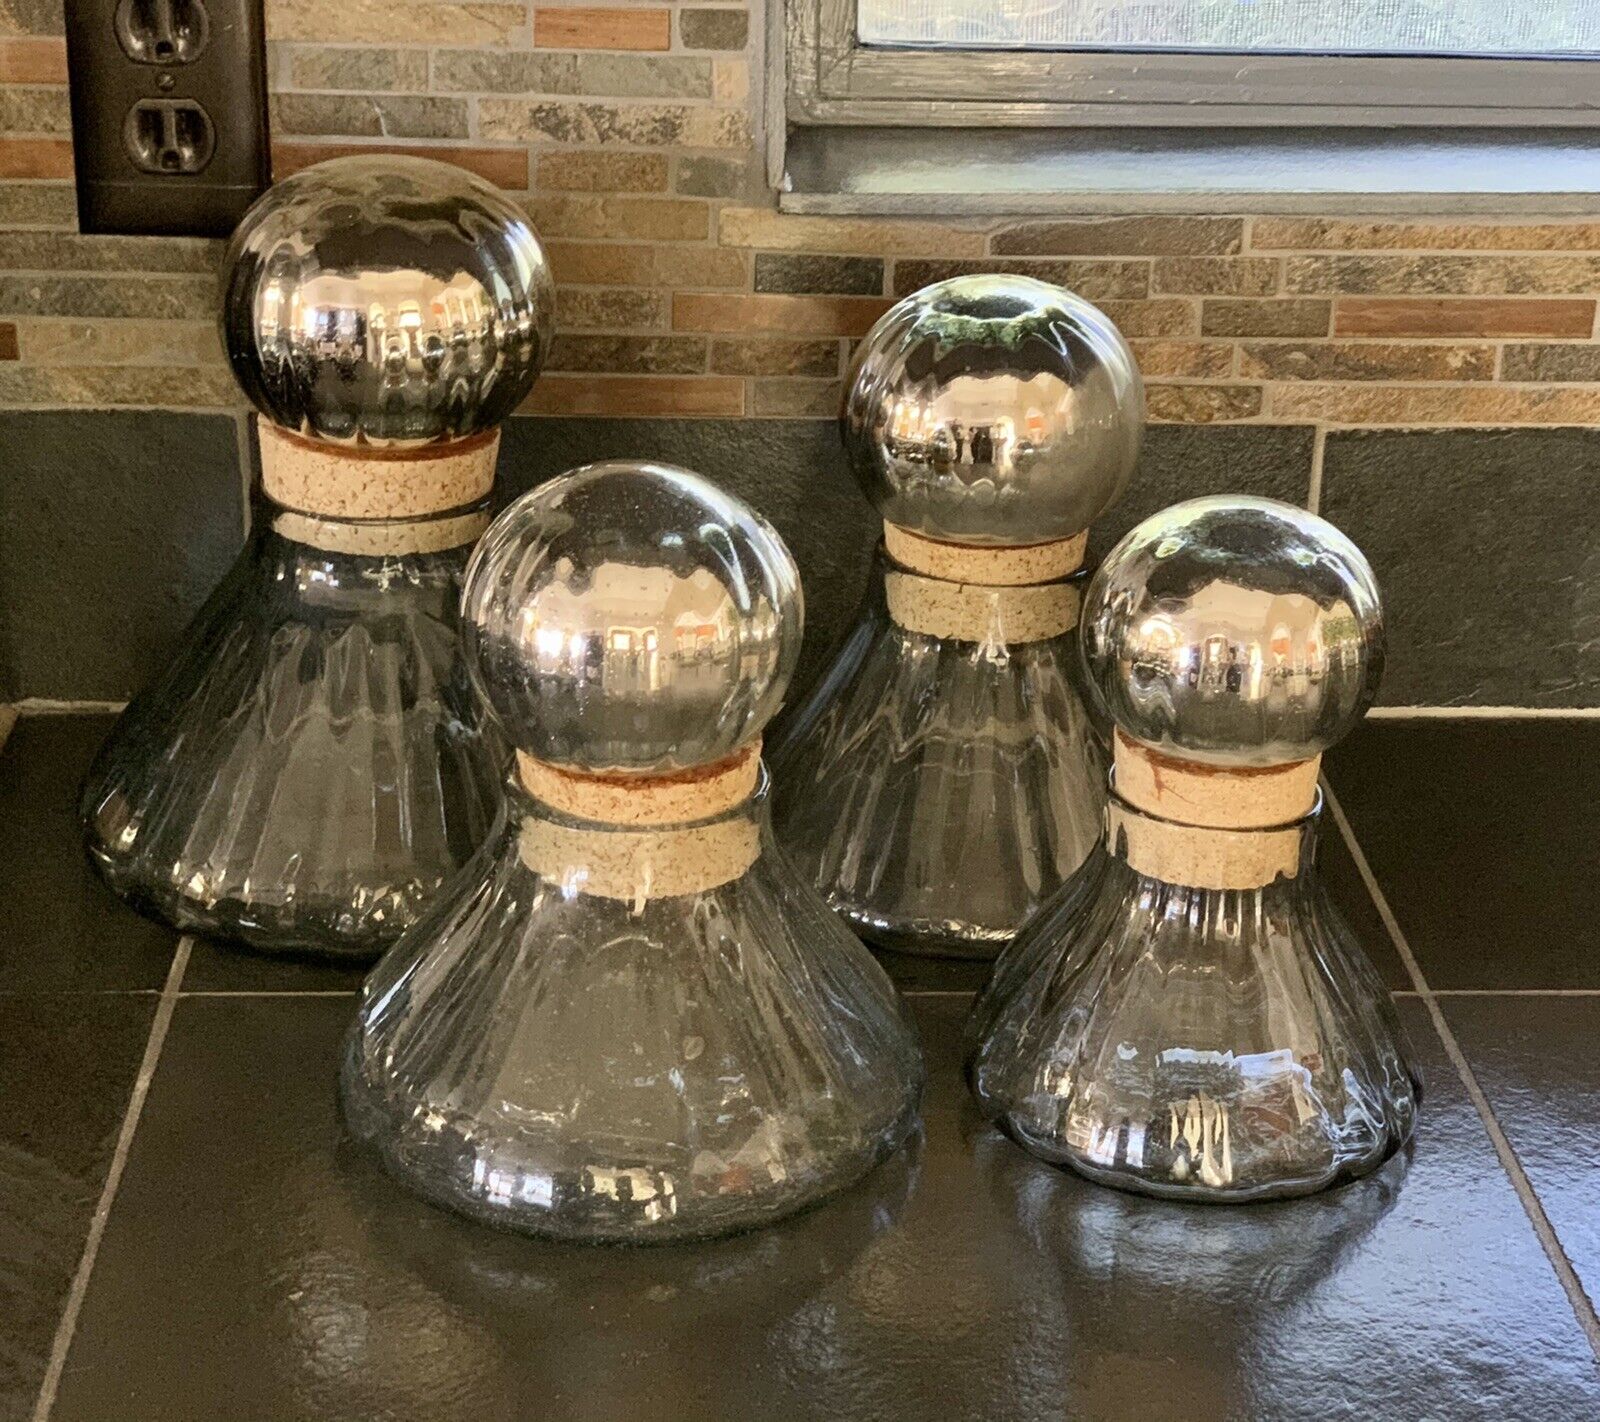 4 Antique Apothecary Glass Storage Jars With Mercury Mirrored Glass n Cork Lids